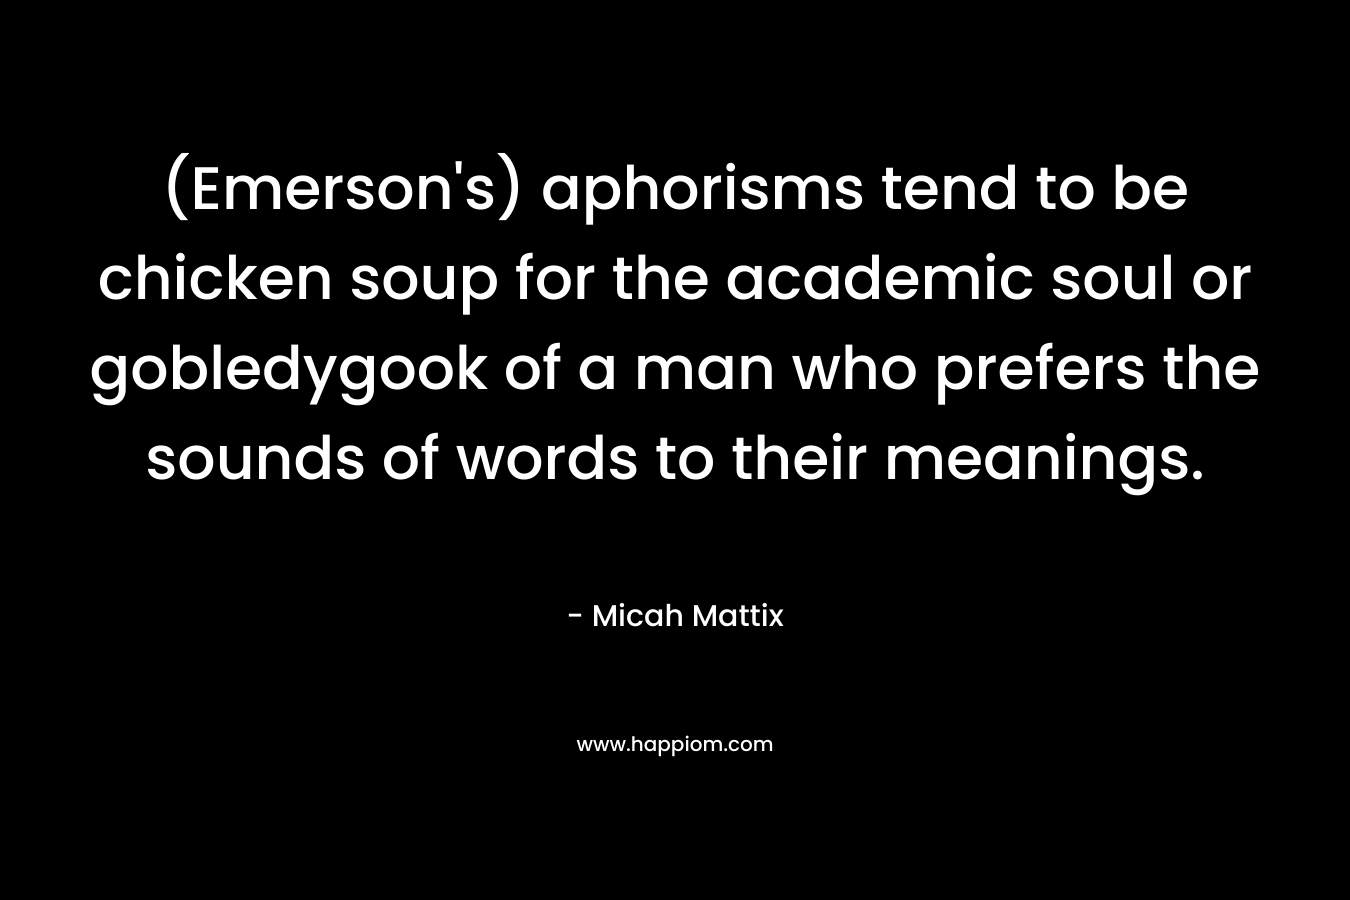 (Emerson's) aphorisms tend to be chicken soup for the academic soul or gobledygook of a man who prefers the sounds of words to their meanings.